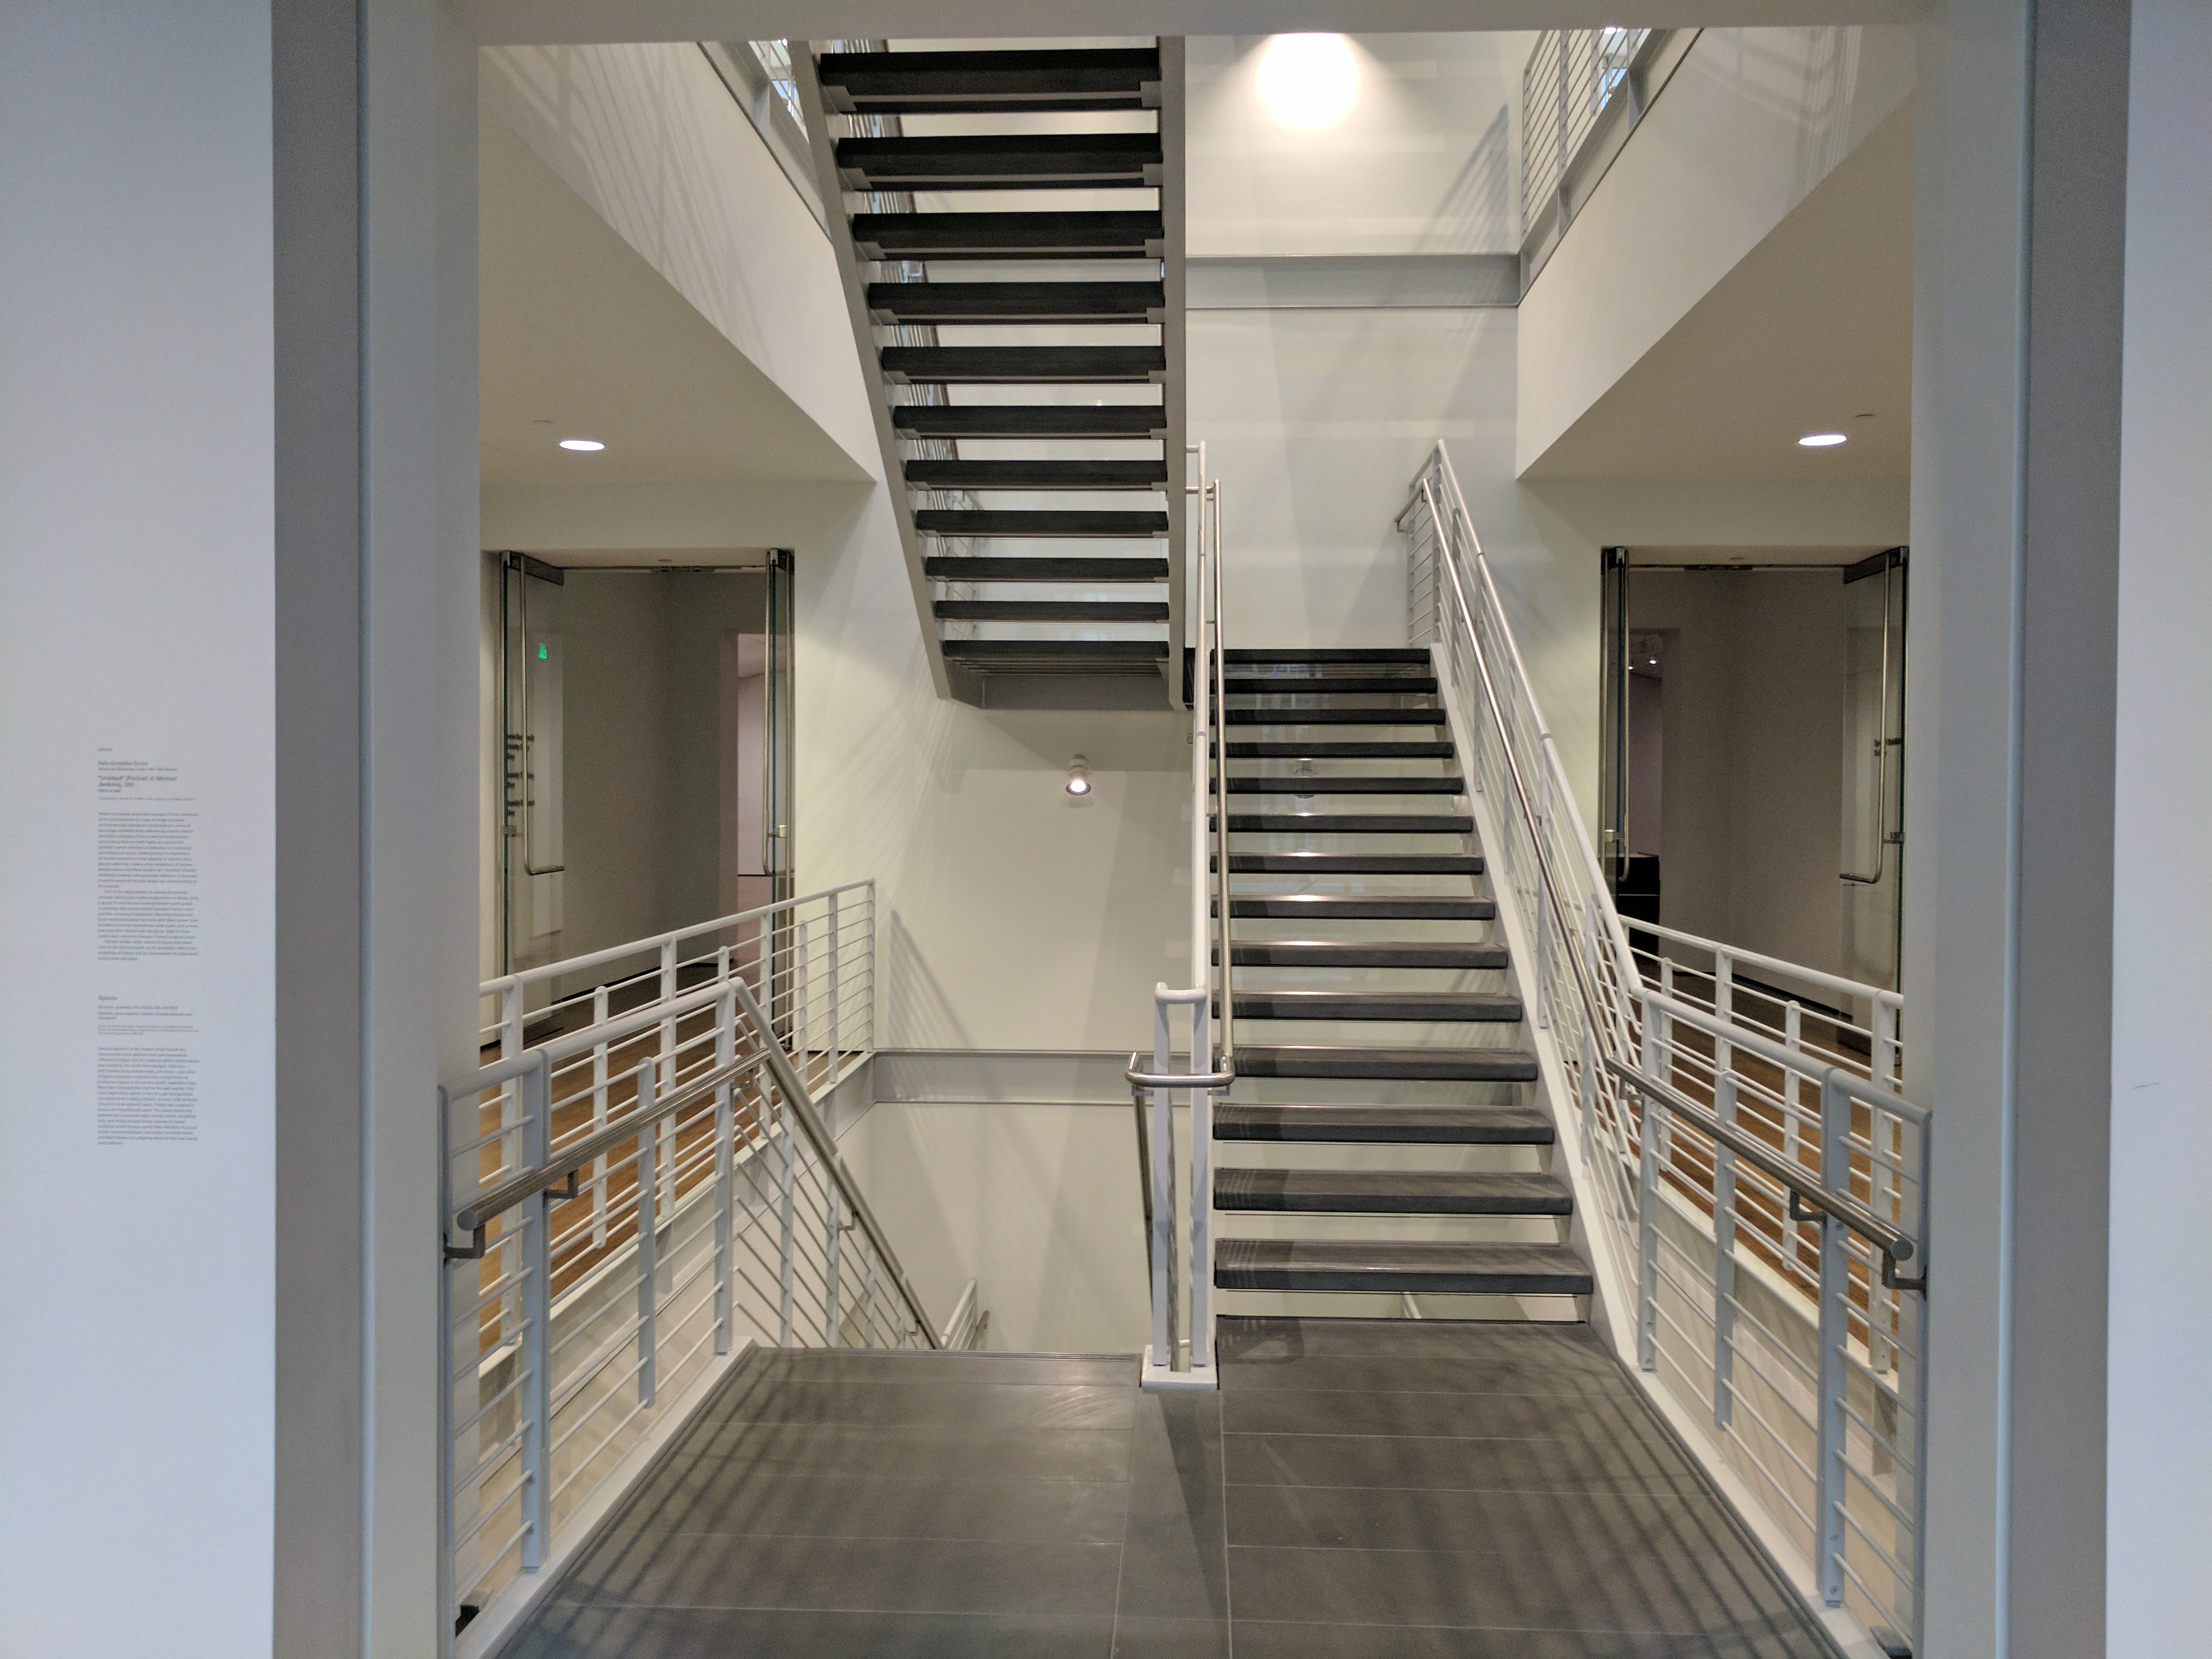 An image of the third floor stairwell of the HAM.